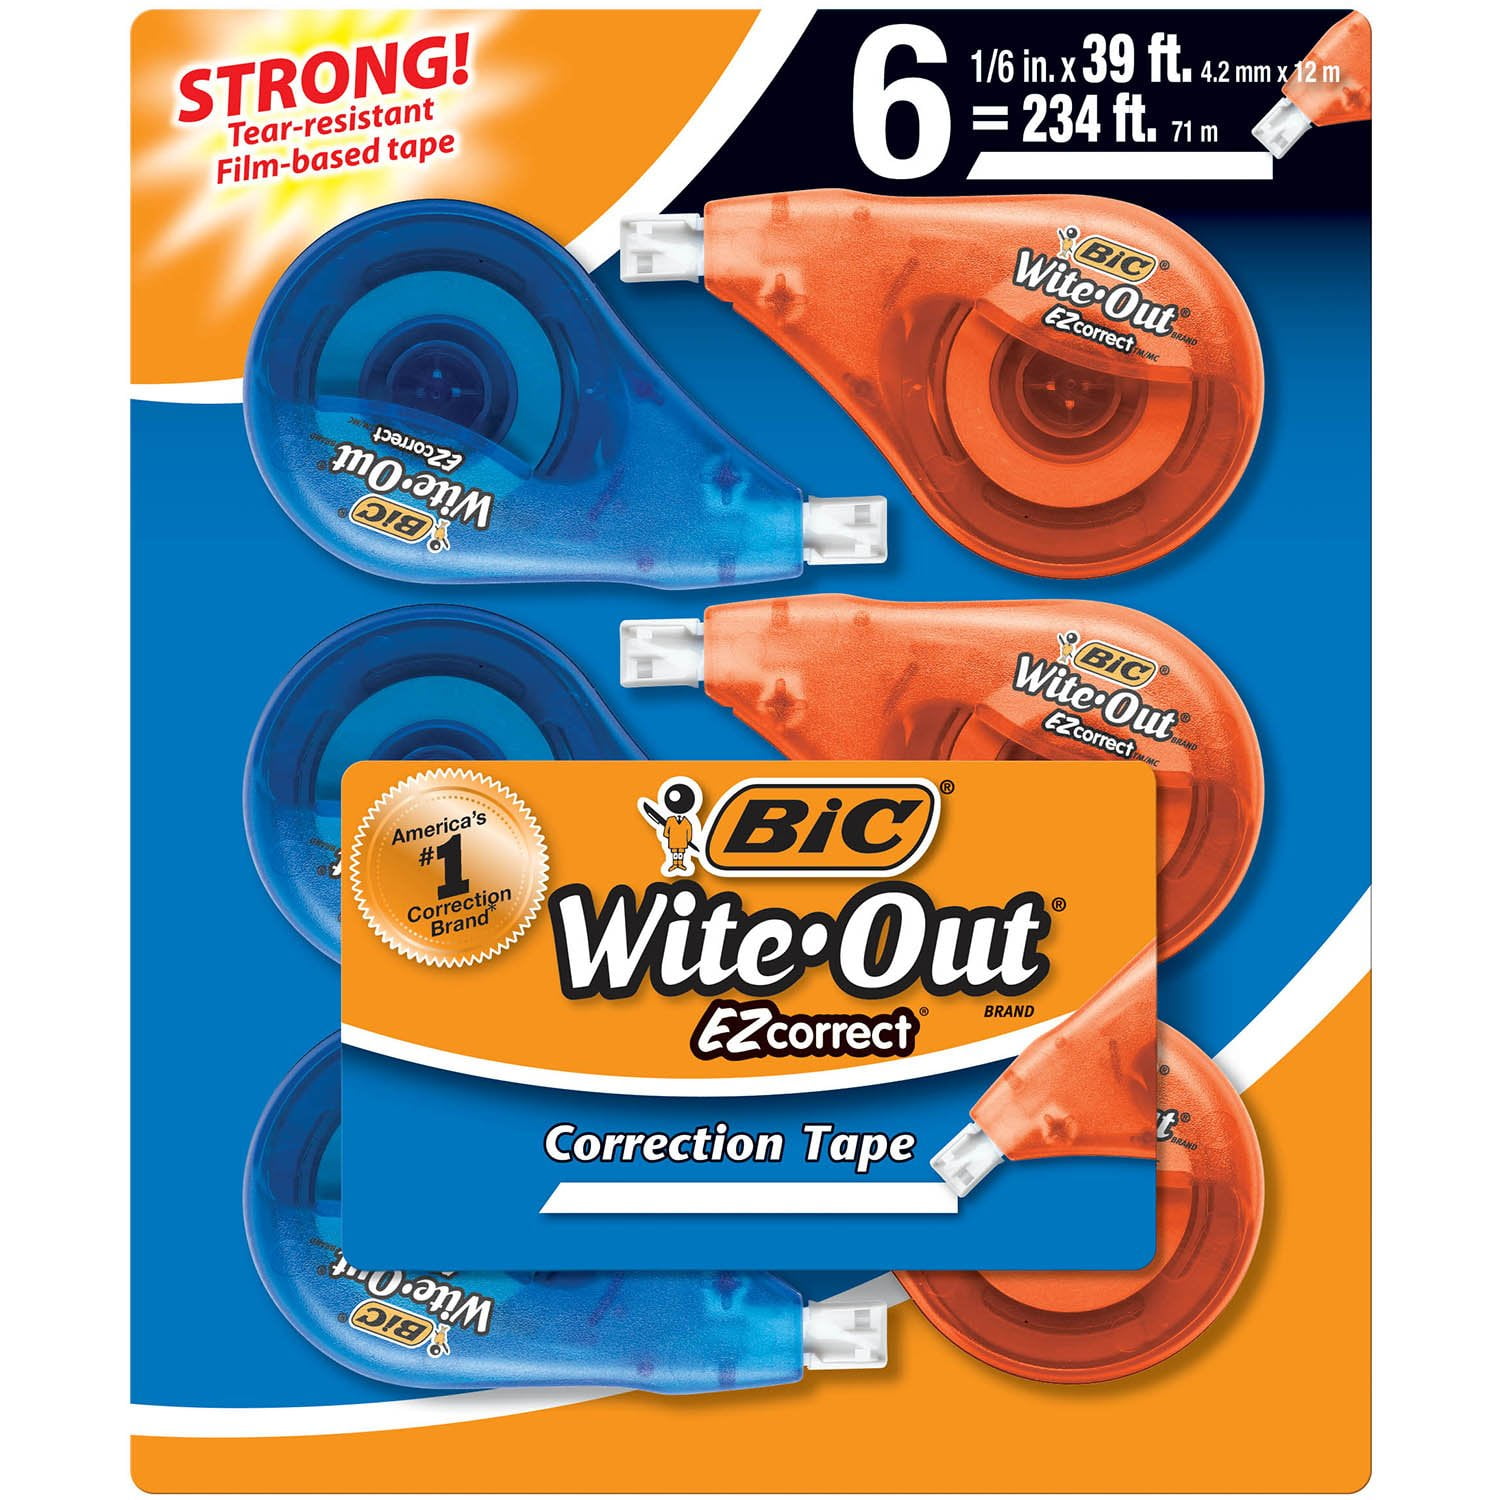 Mr Pen- Correction Tapes, Pack of 7, Correction Tape White Tape, Tape  Eraser, White Correction Tape, White Tape, White Out, Wipe Out Tape, Wide  Out Tape, Correction Tape Wide, Correction Tape Eraser 